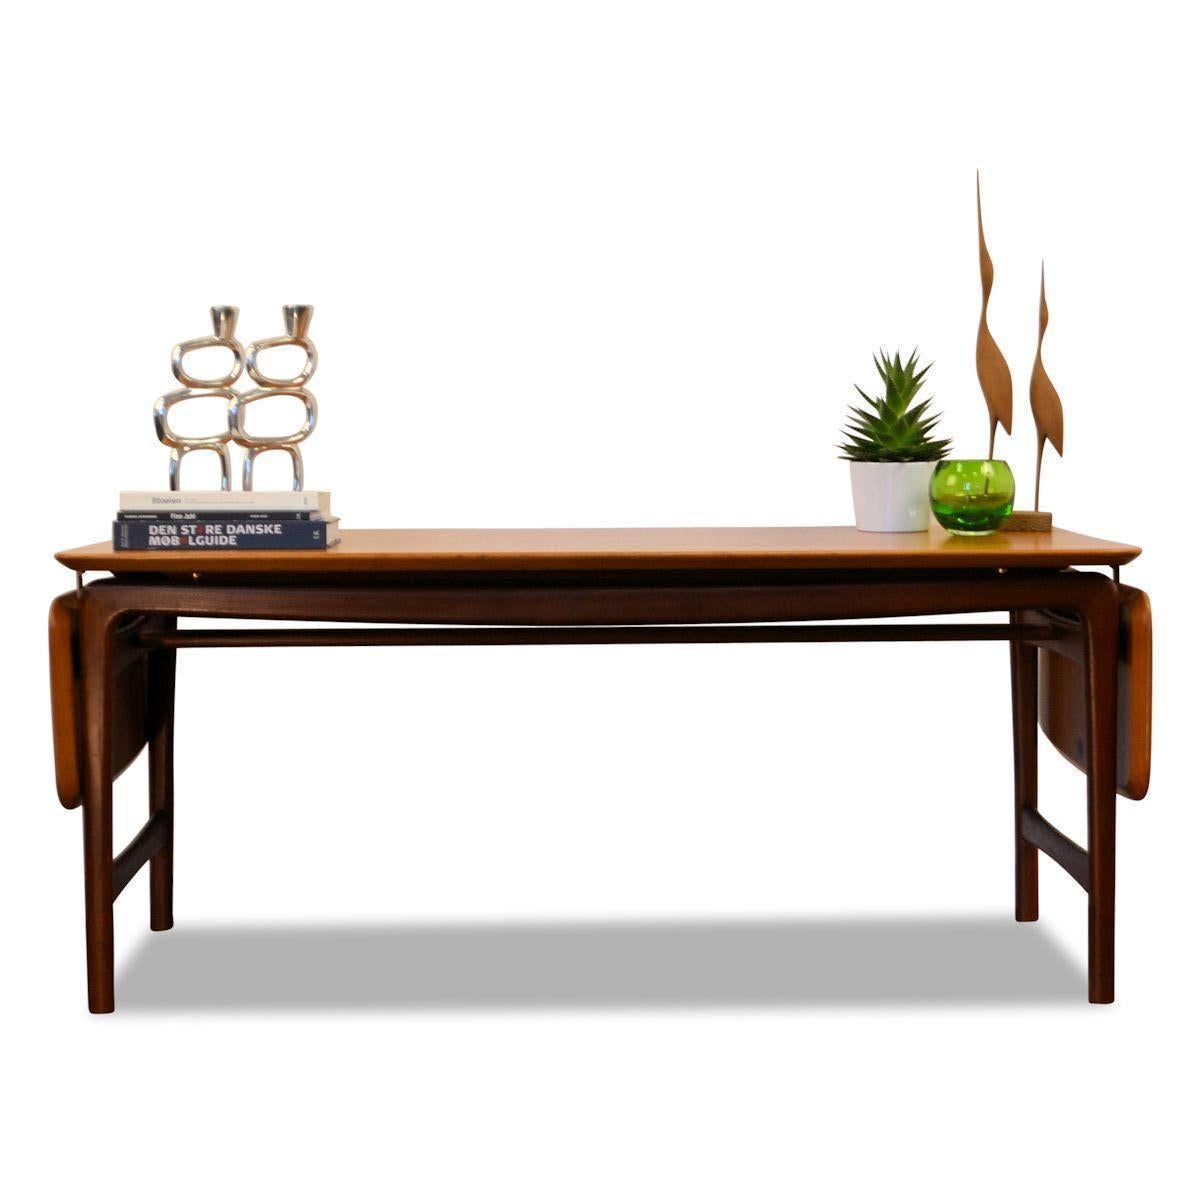 Vintage Danish design extendable massive teak table designed by Peter Hvidt & Orla Mølgaard-Nielsen for France & Daverkosen during the 1950s.
This coffee table is made from solid teak wood with foldable side leaves and brass hardware.